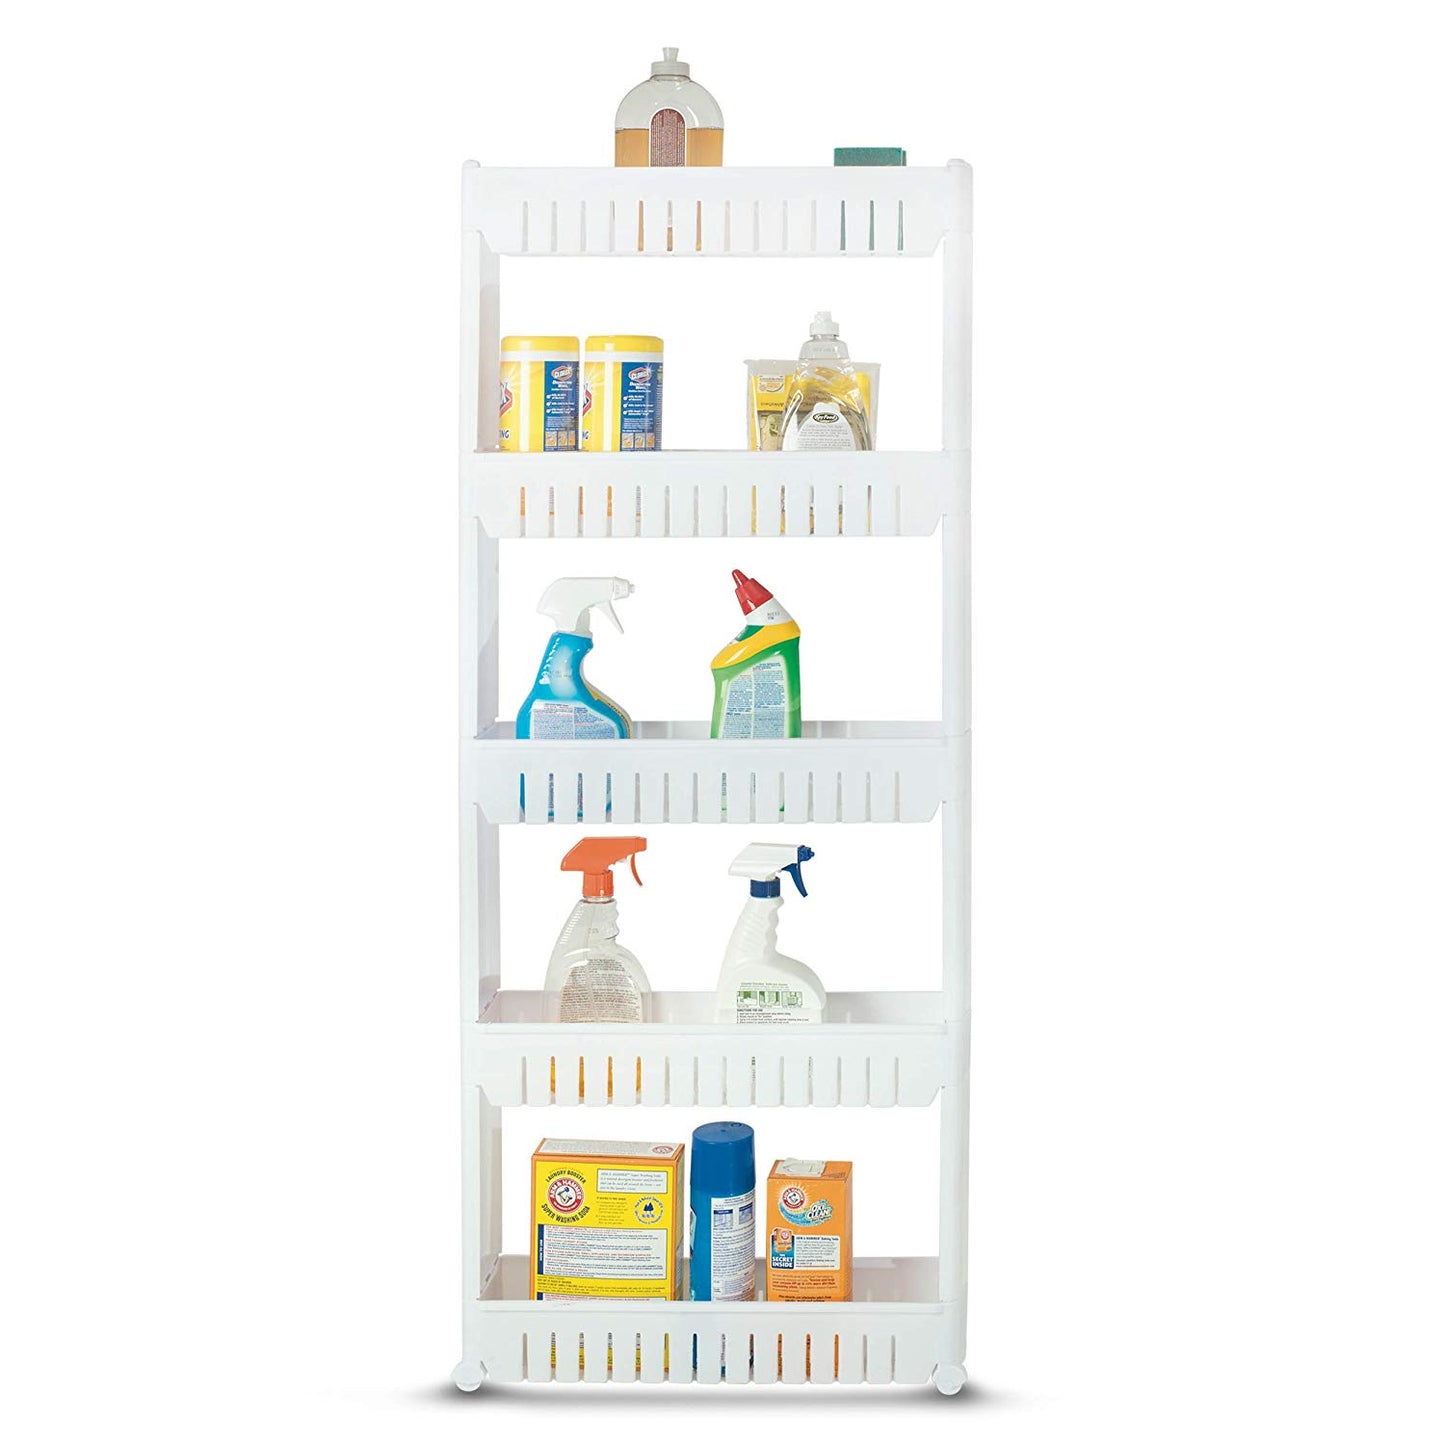 Bathroom and Kitchen Slim Storage Cart - Slide Out Shelf Storage Tower Cabinet as a Plastic Small Mobile Shelving with 5 Shelves Narrow Space Organizer in Laundry Room Closet Office